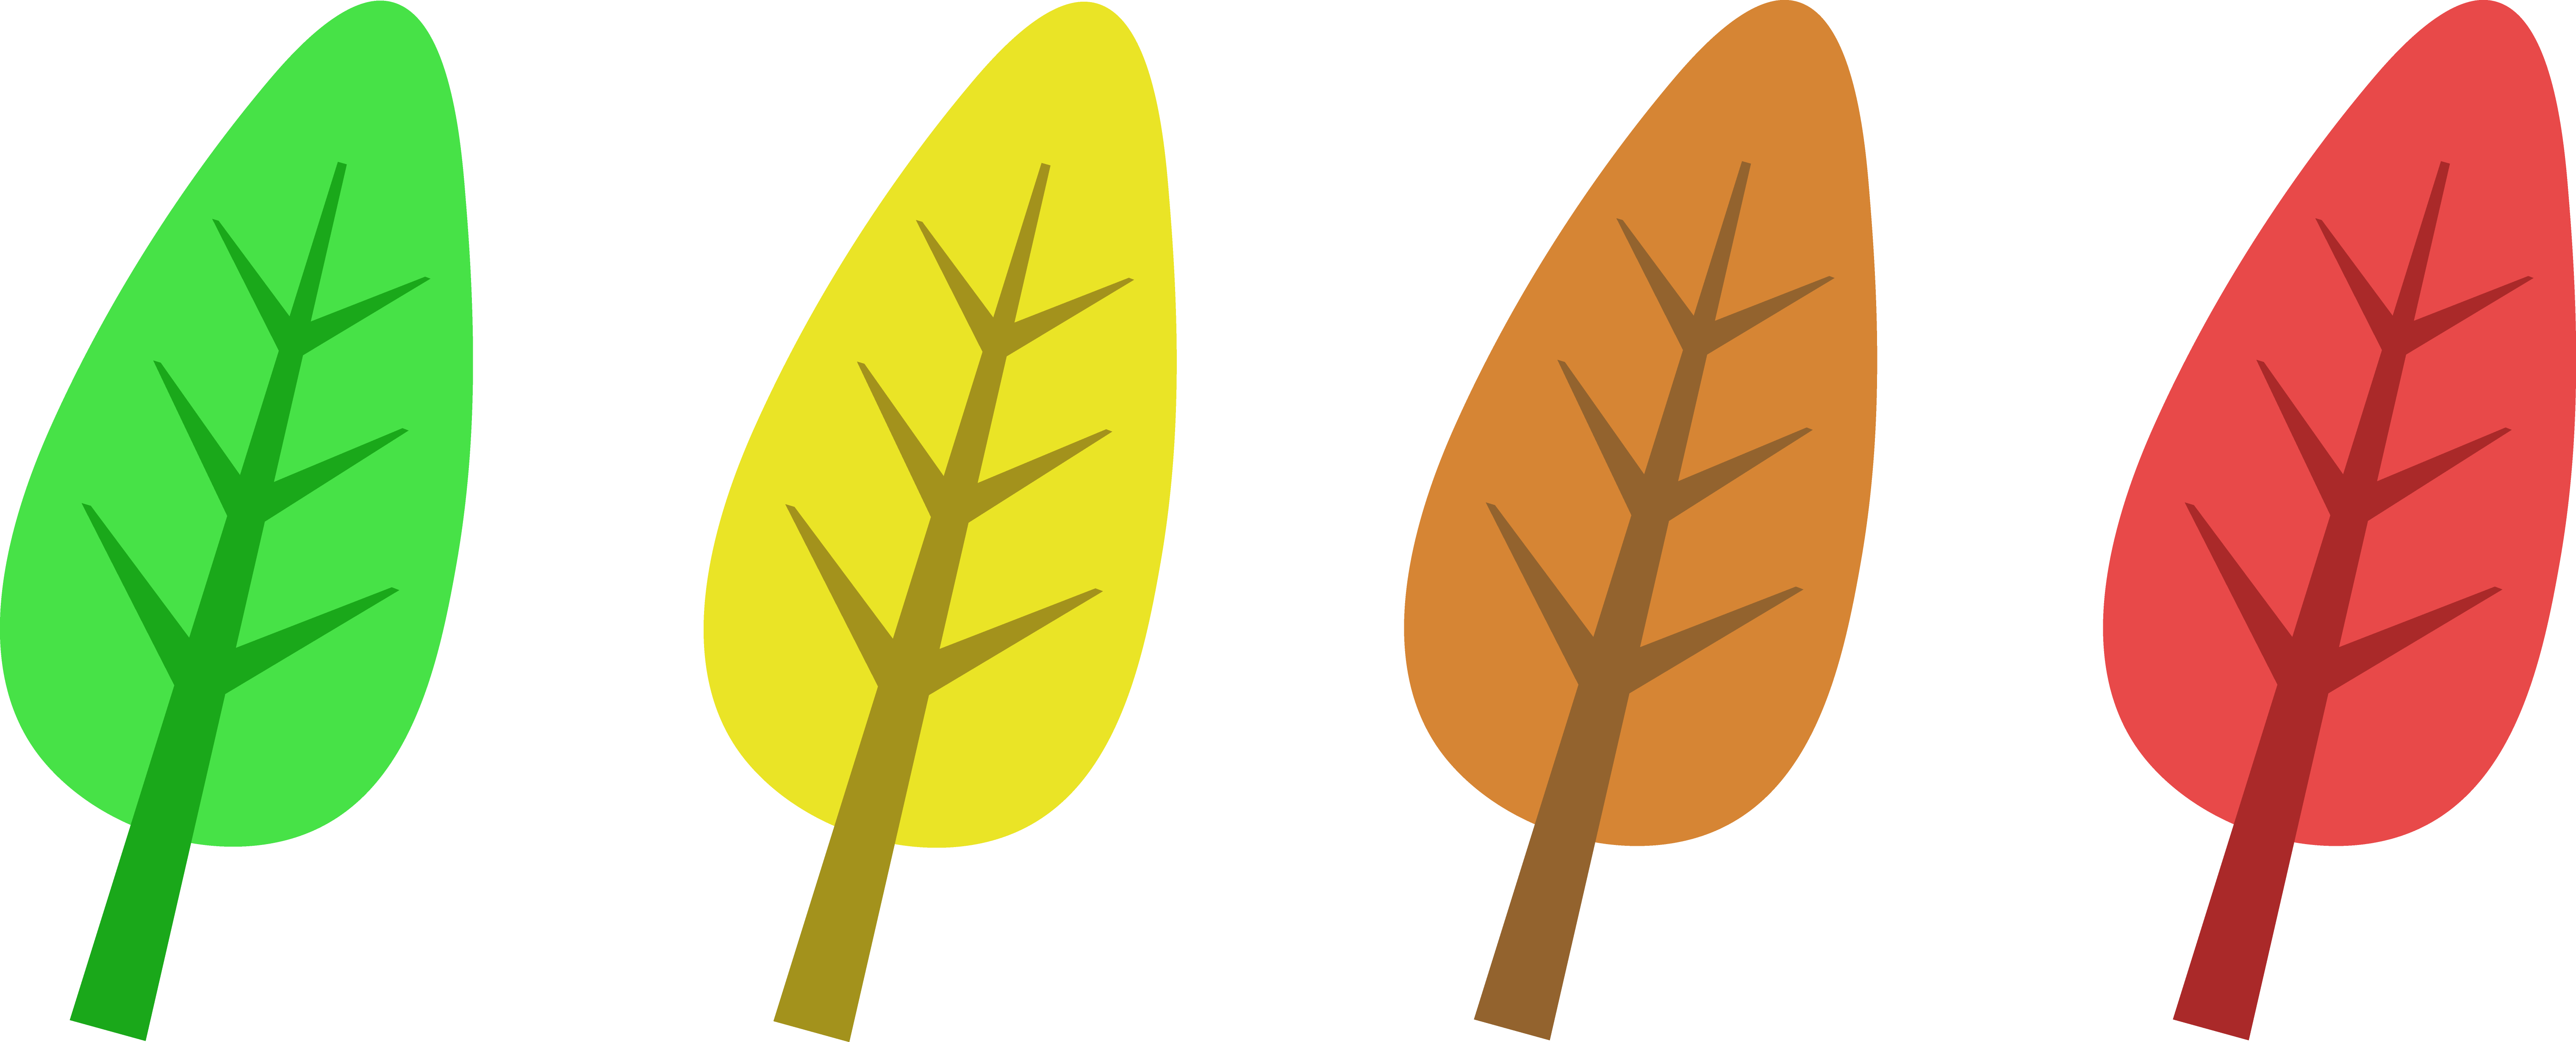 Leaf Leaves Graphics Images And Photos Clipart